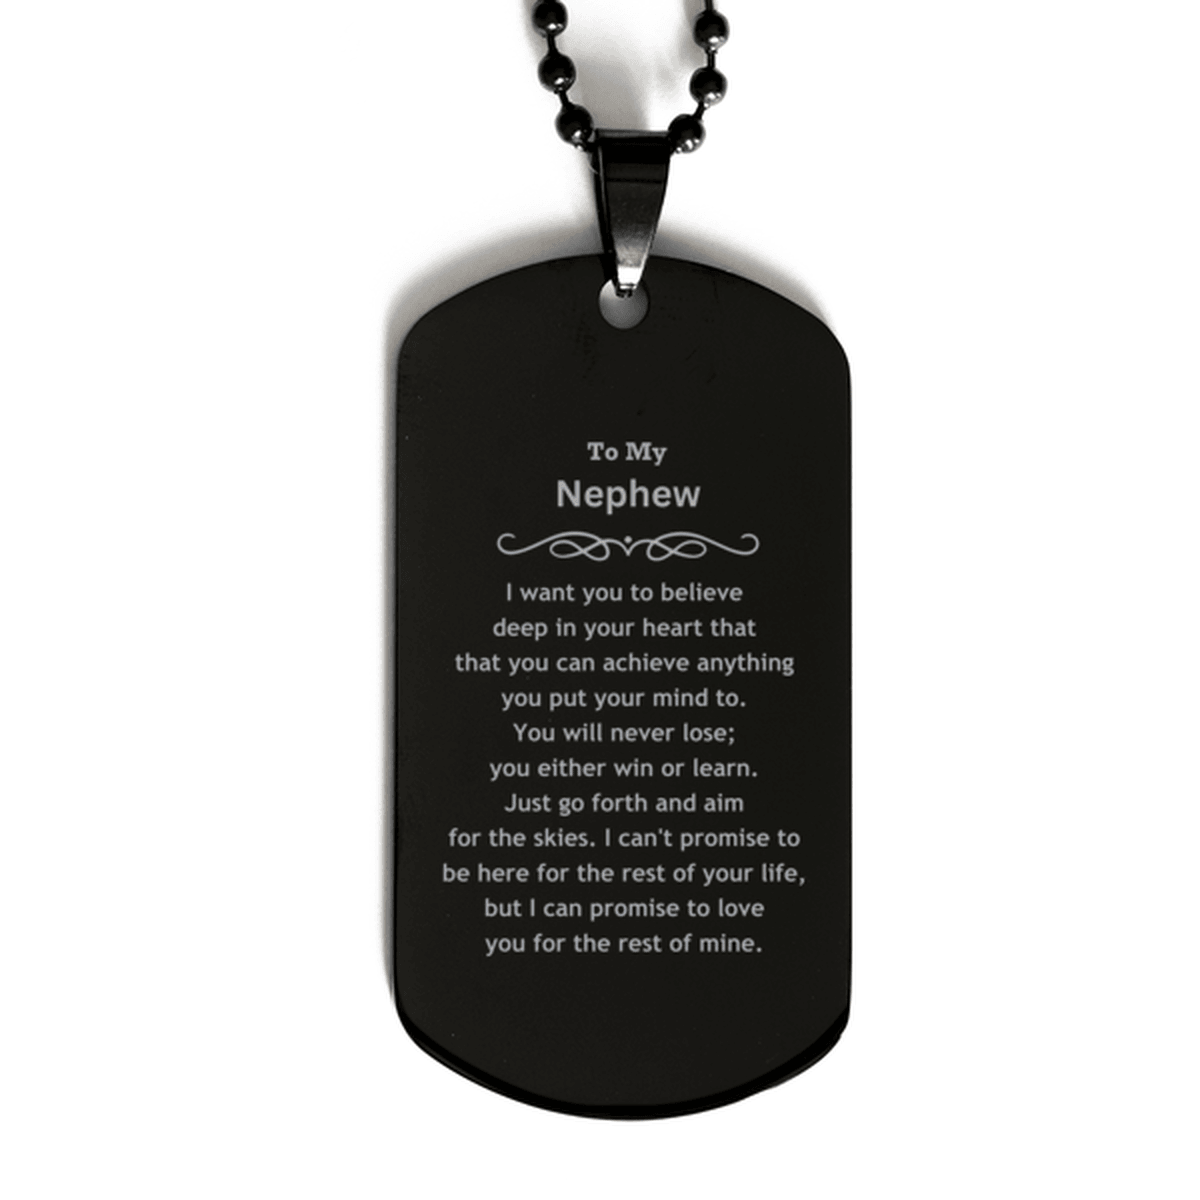 Motivational Nephew Black Dog Tag Necklace - I can promise to love you for the rest of mine, Birthday Christmas Jewelry Gift for Men - Mallard Moon Gift Shop